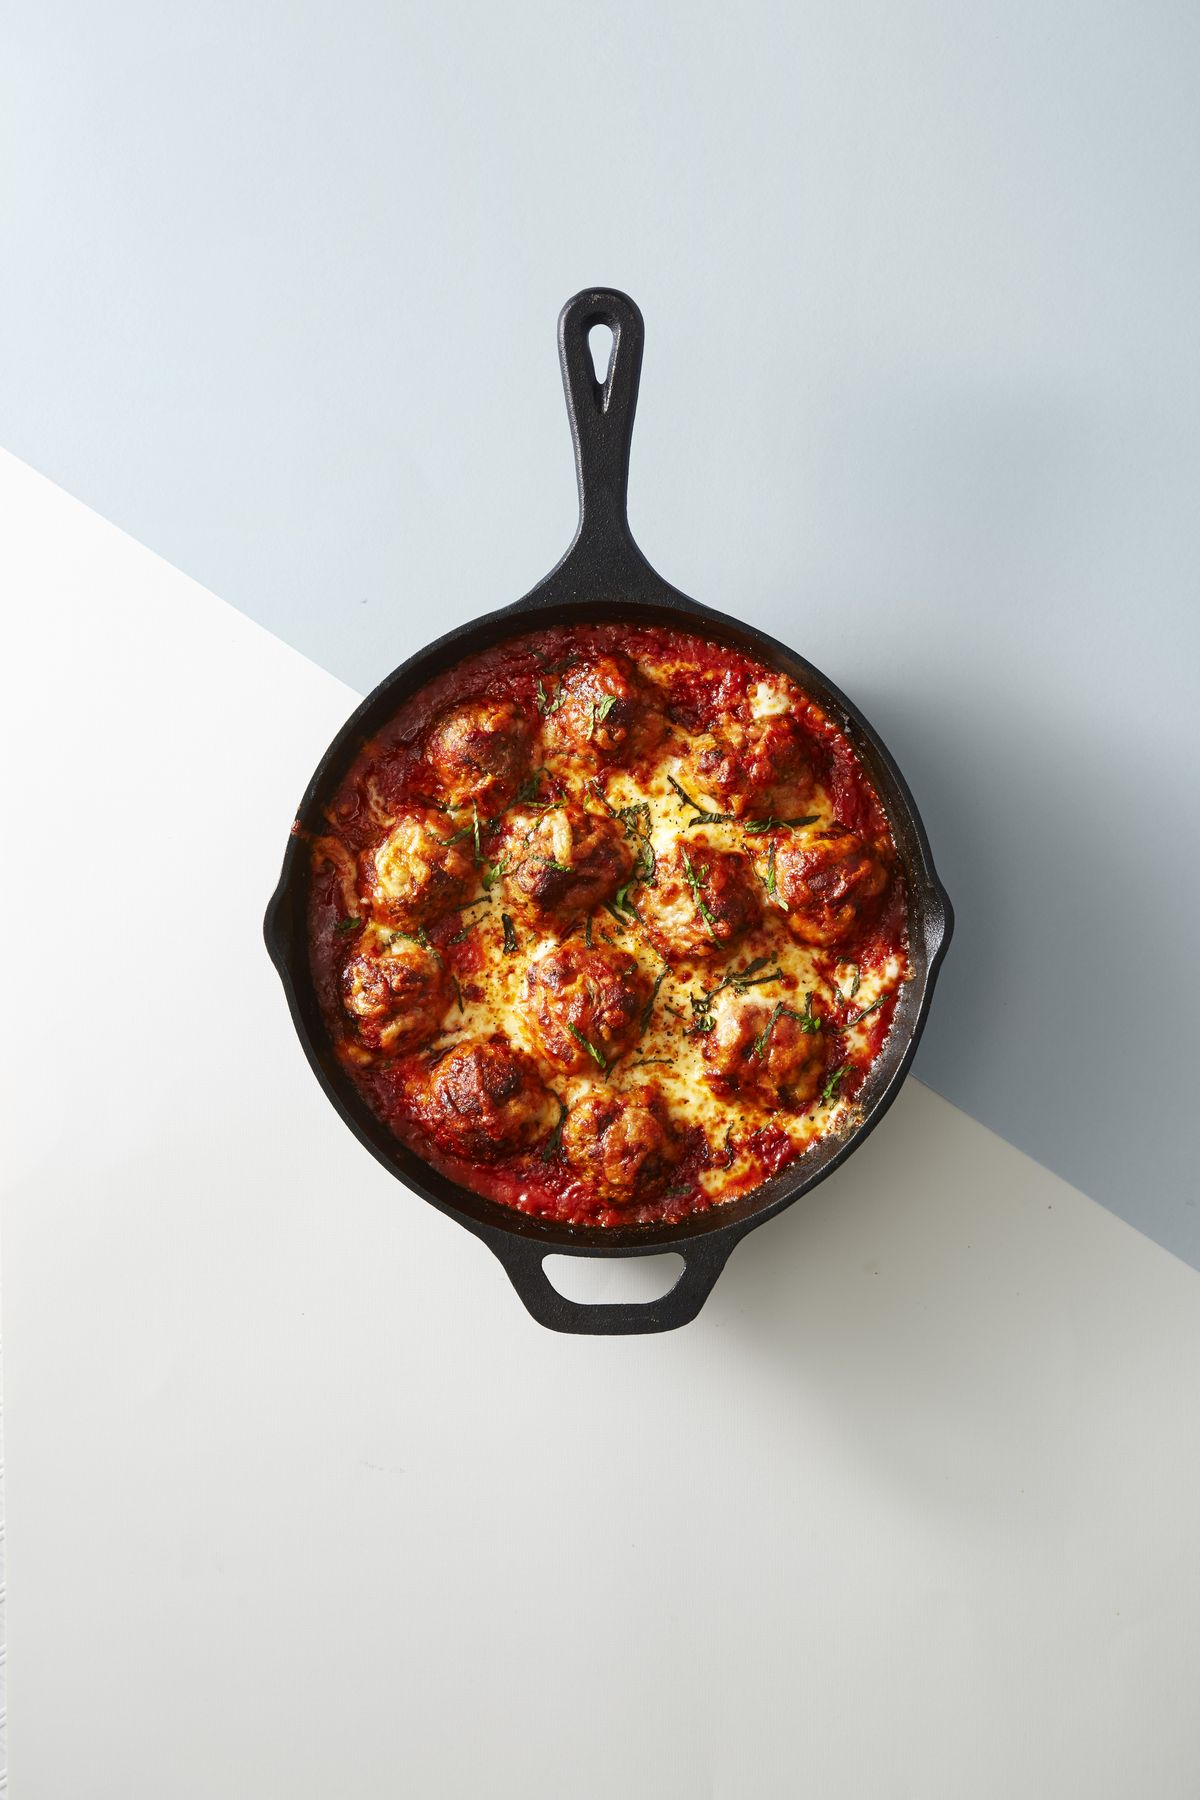 baked meatballs in a forged iron pan